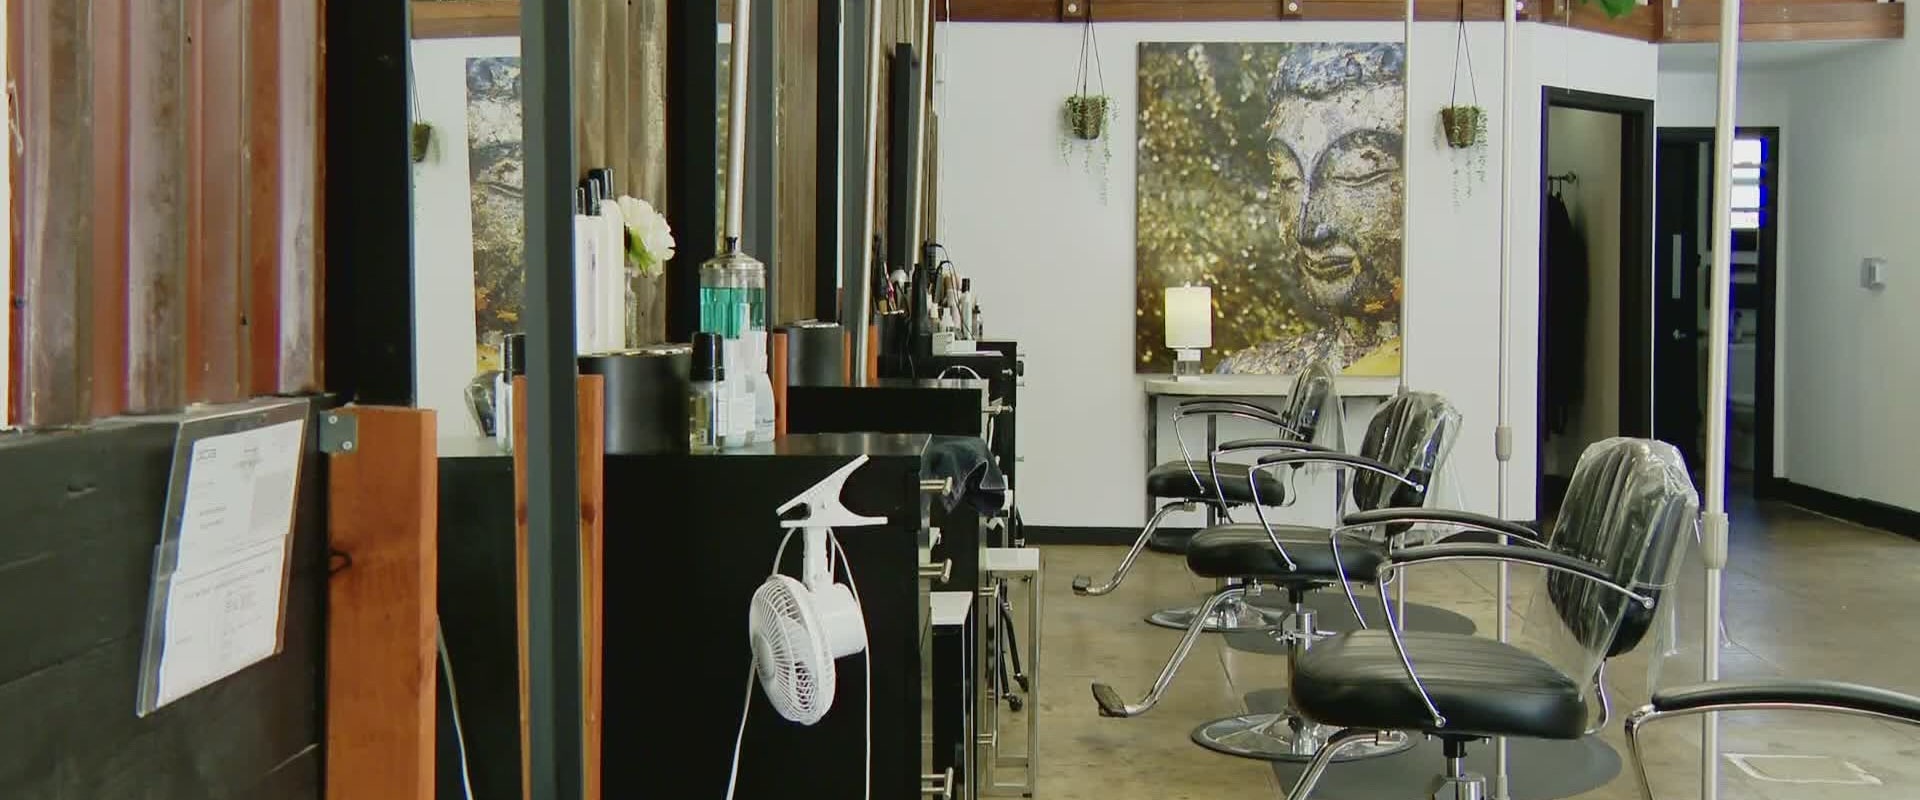 Are san diego salons open?